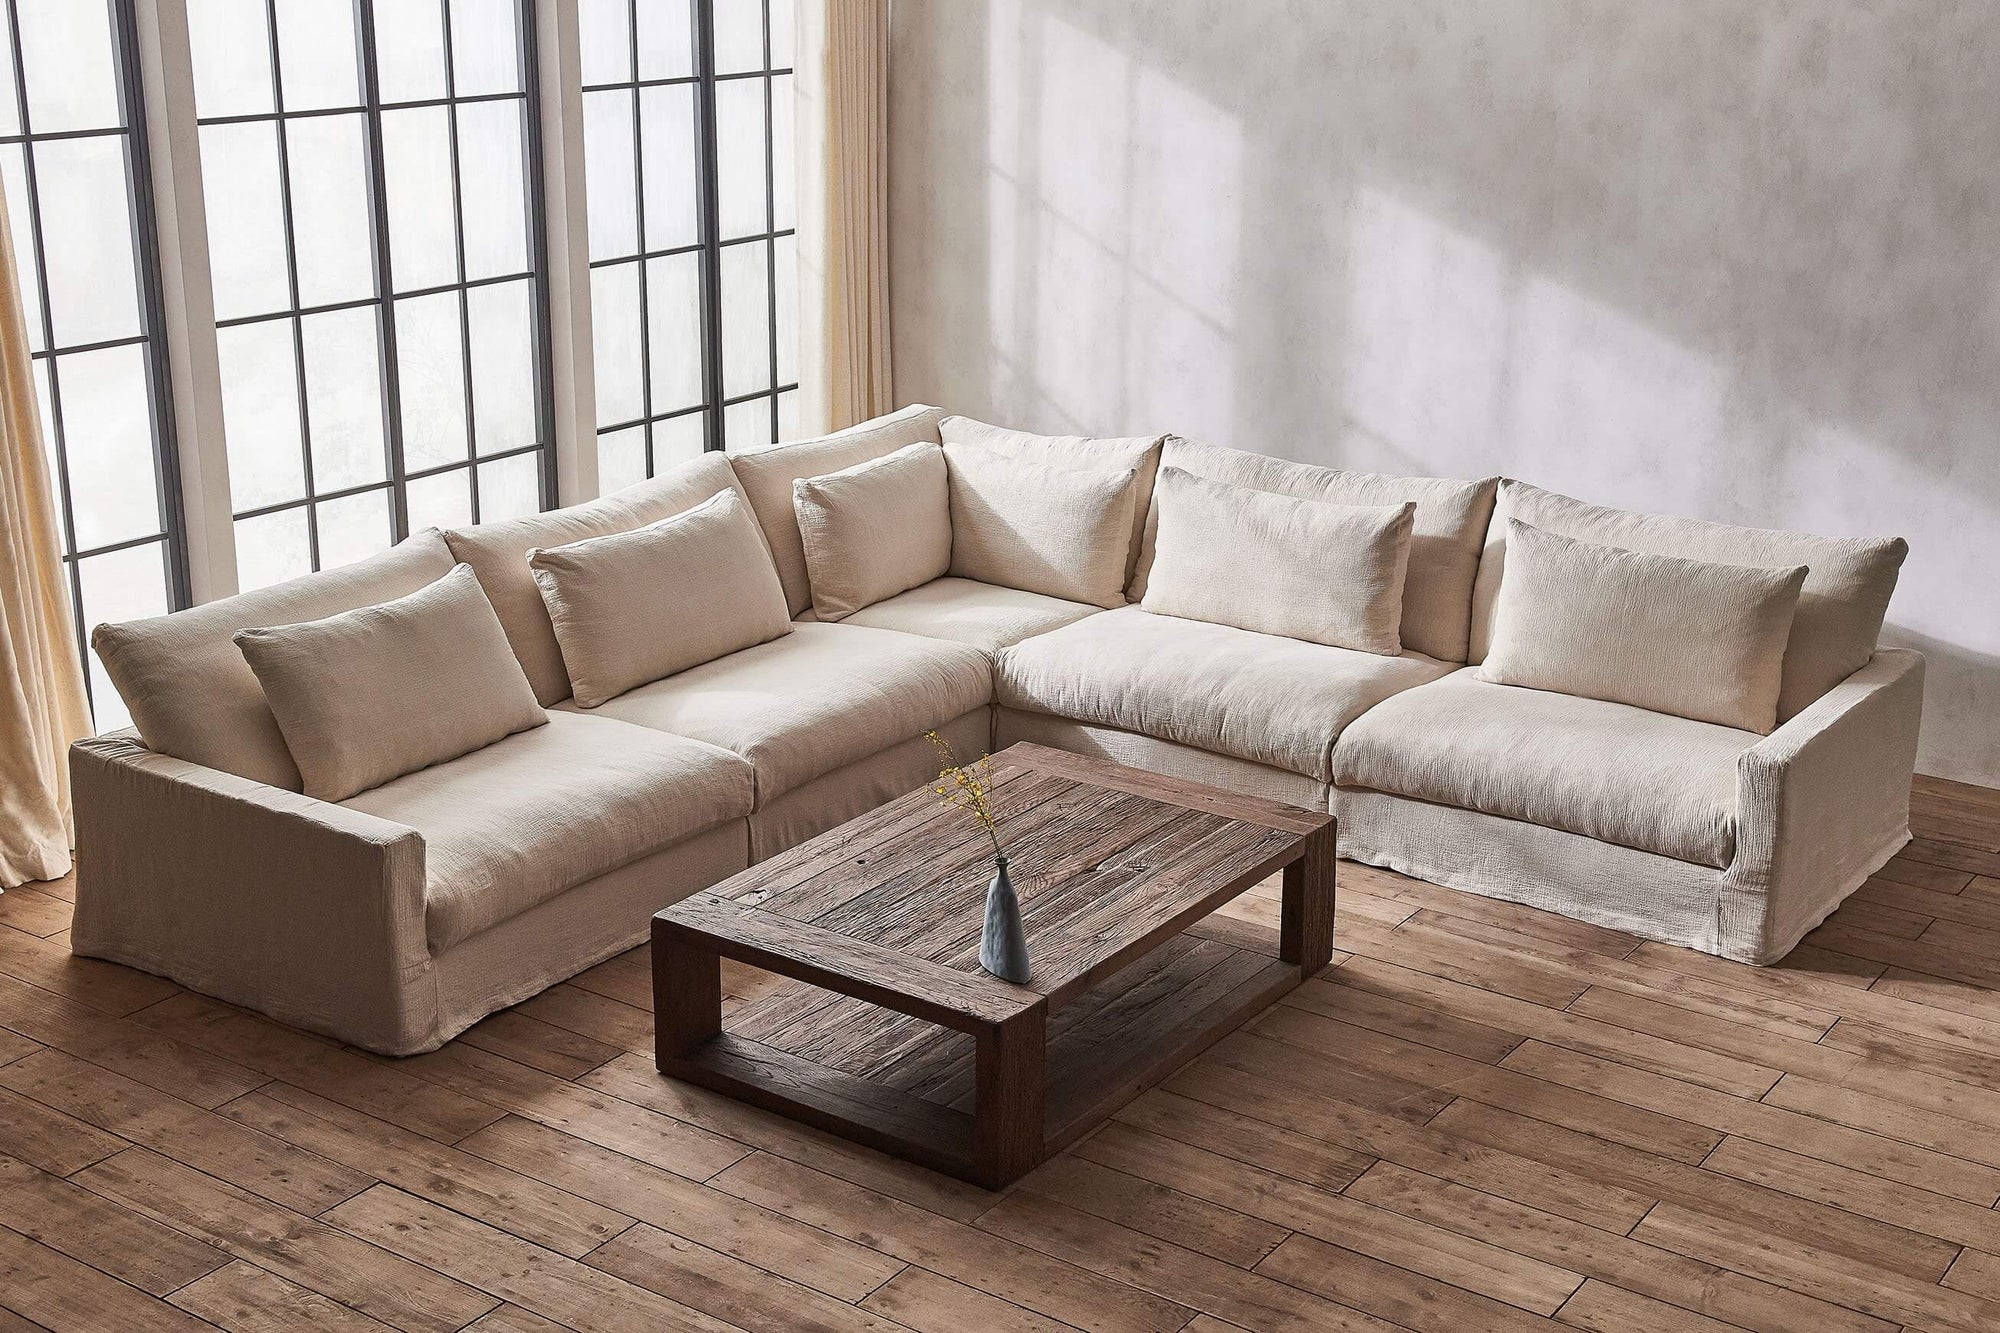 Devyn Corner Sectional Sofa in Corn Silk, a light beige Washed Cotton Linen, placed in a sunlit room with a large window around a wooden coffee table